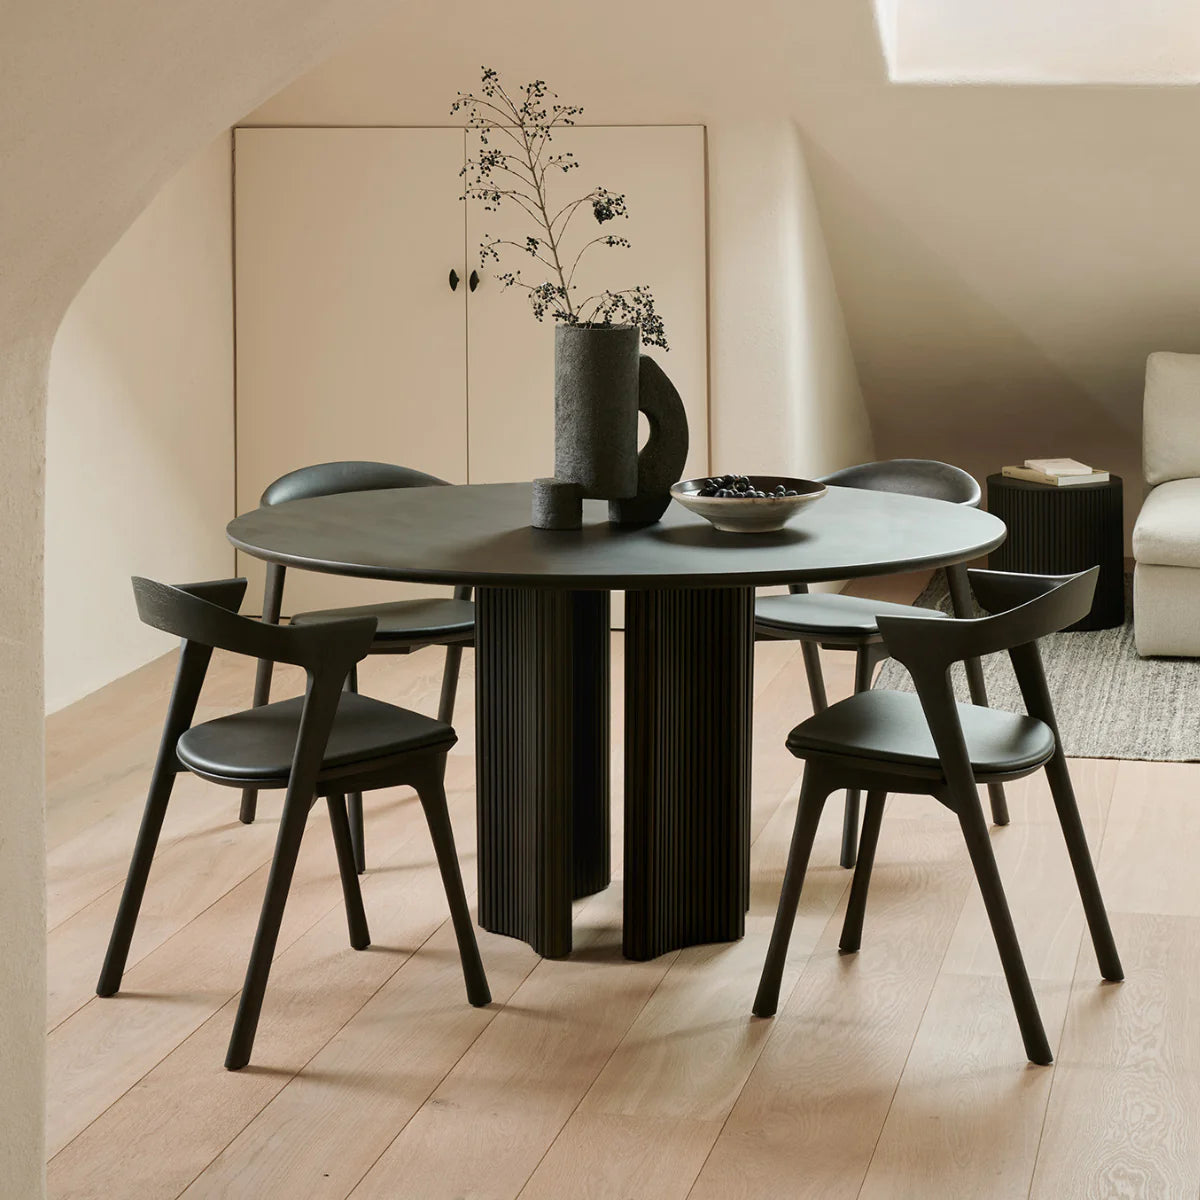 roller max dining table by ethnicraft at adorn.house